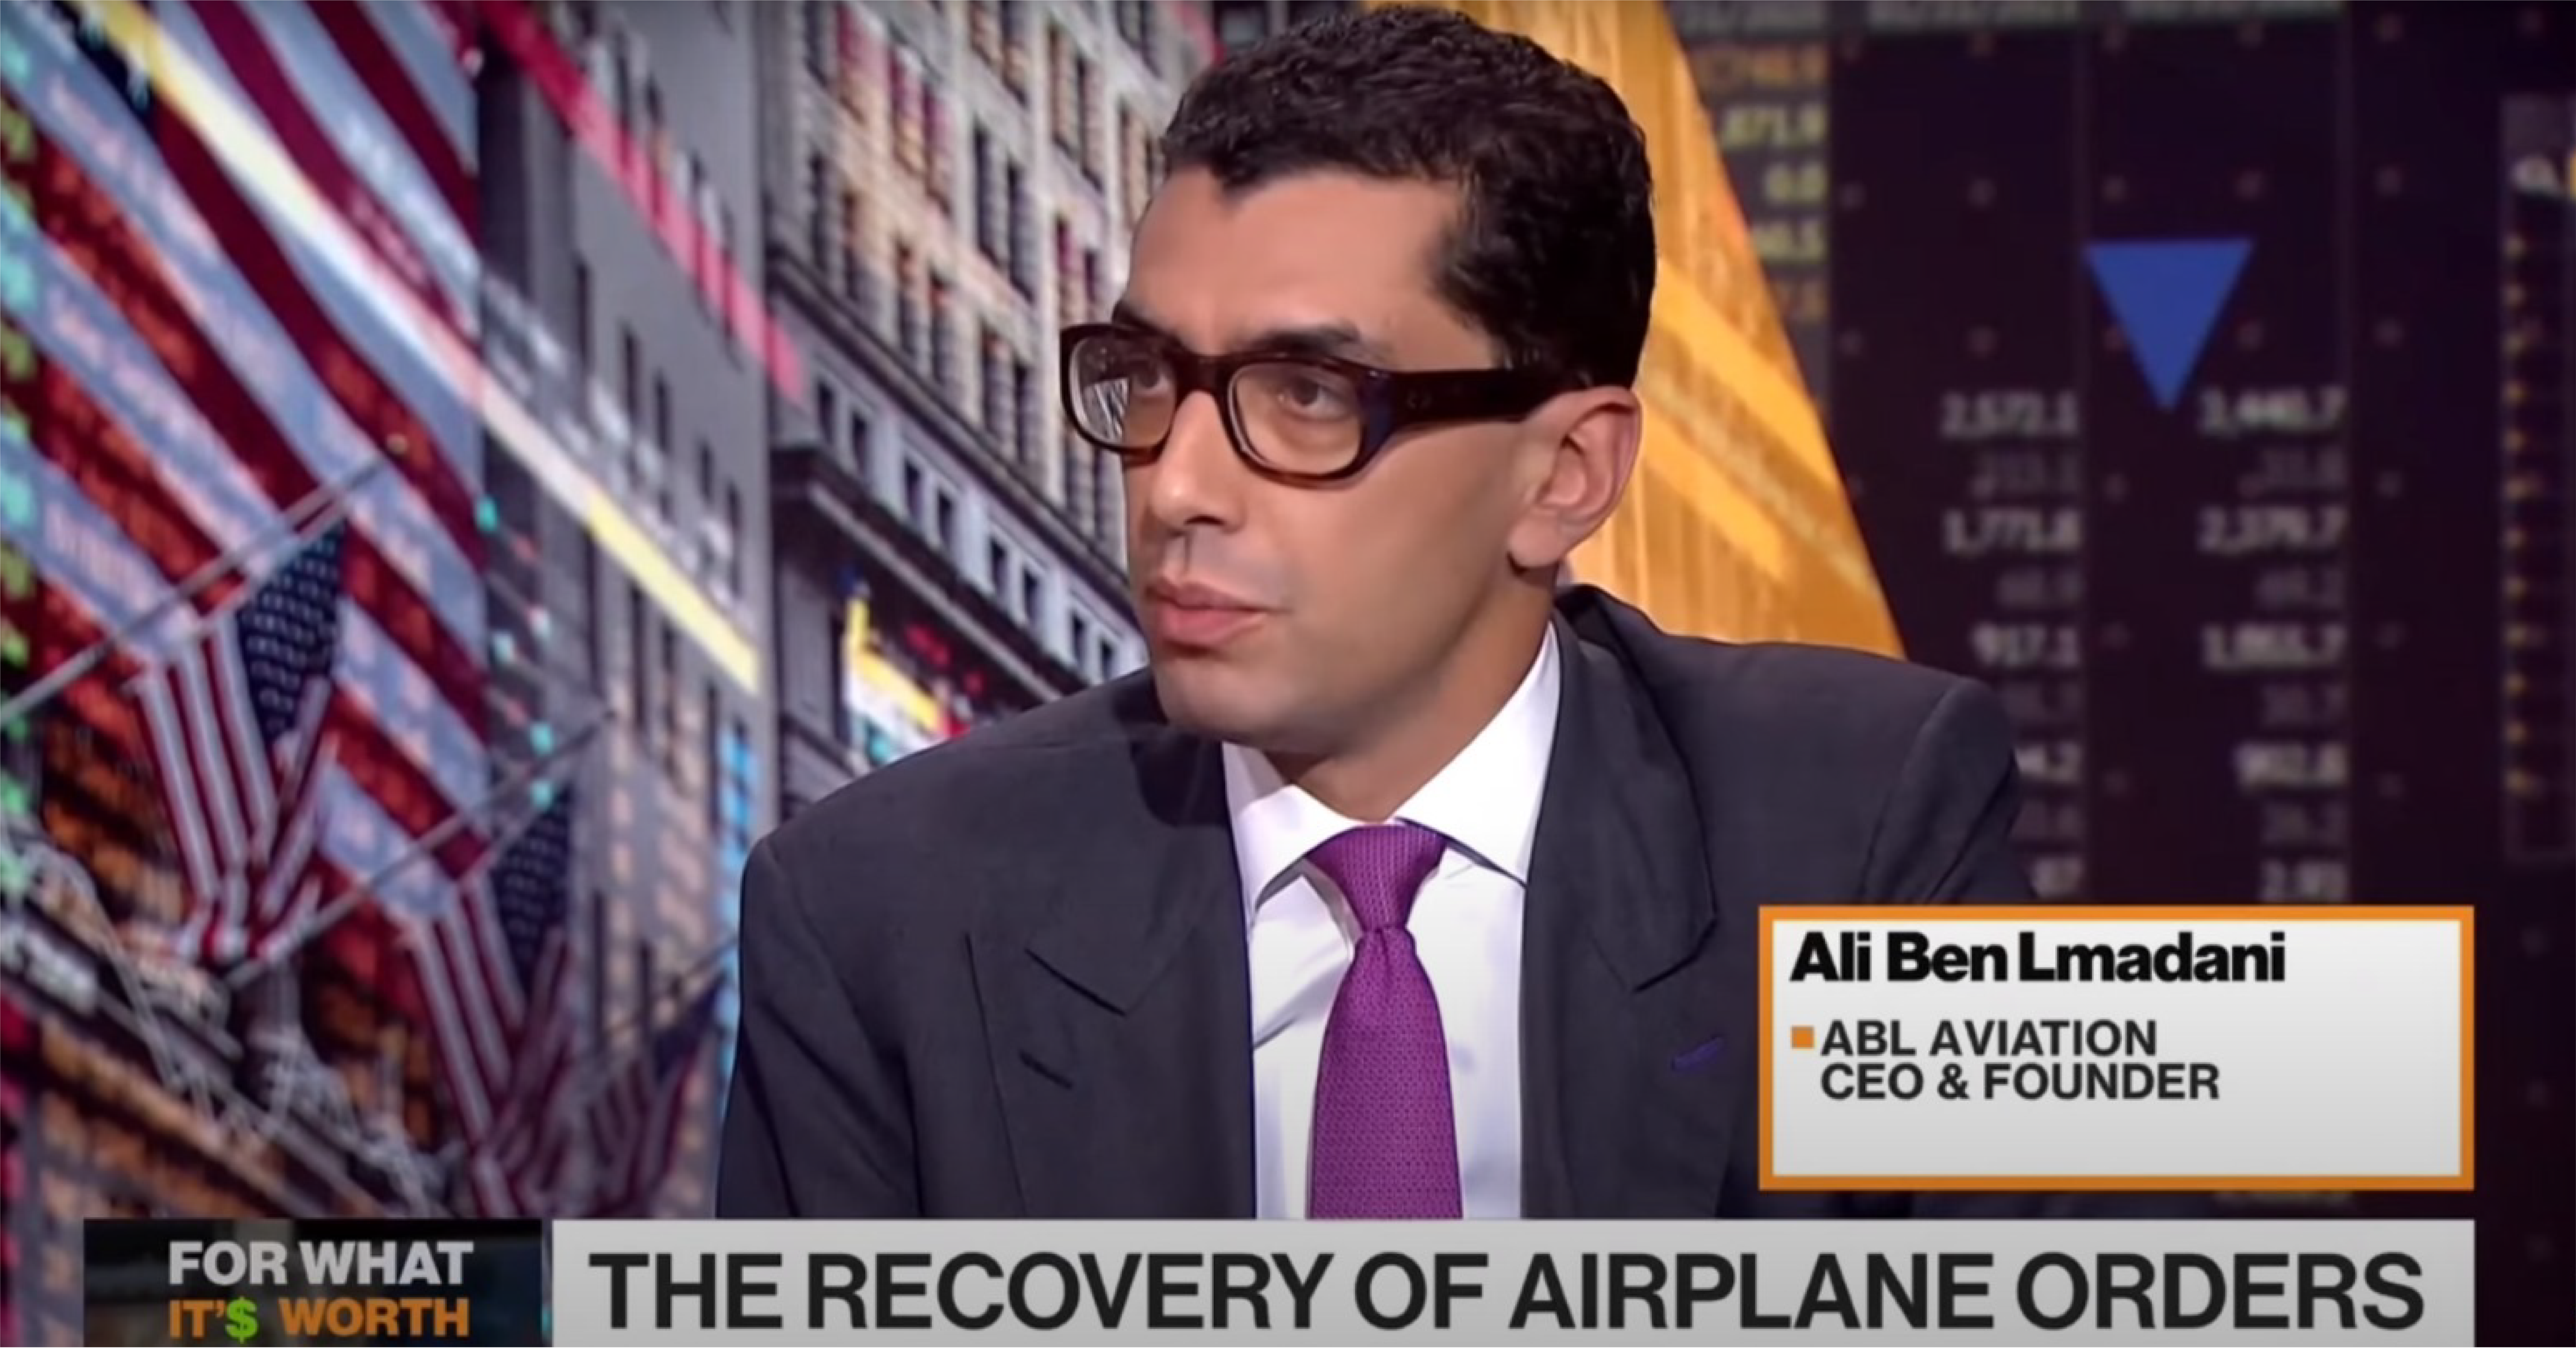 Bloomberg Markets: ABL Aviation’s CEO, Ali Ben Lmadani Discusses Aircraft Orders Recovery in 2023